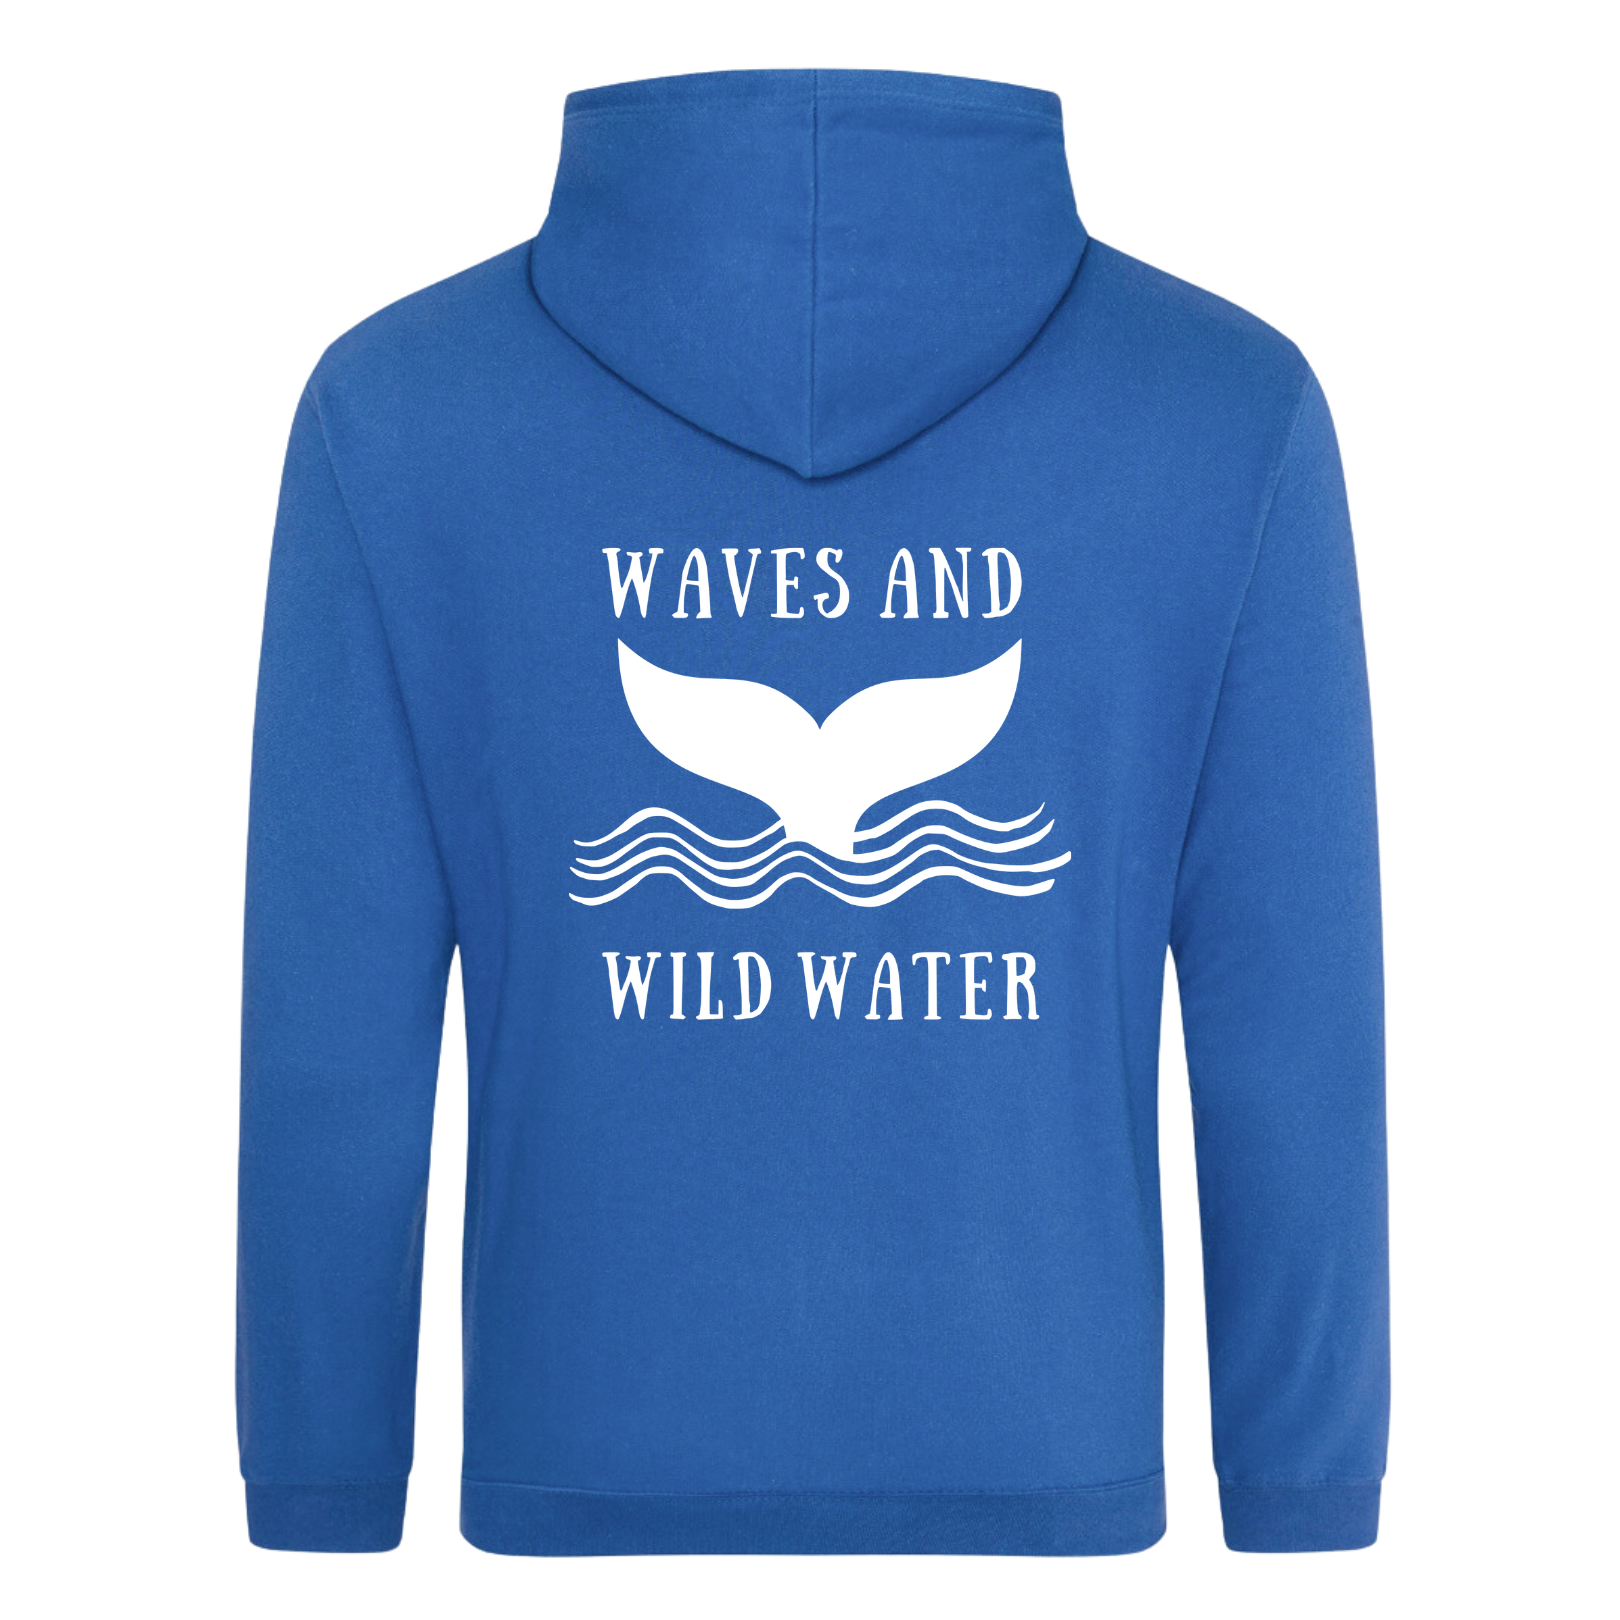 The back of the Waves and Wild Water ocean blue hoodie showing the large whale tail logo coming out of the waves. The logo is hand printed in white vegan ink and contrasts perfectly with the ocean blue of the hoodie, making this the go to choice for wild  simmers and sea dippers.